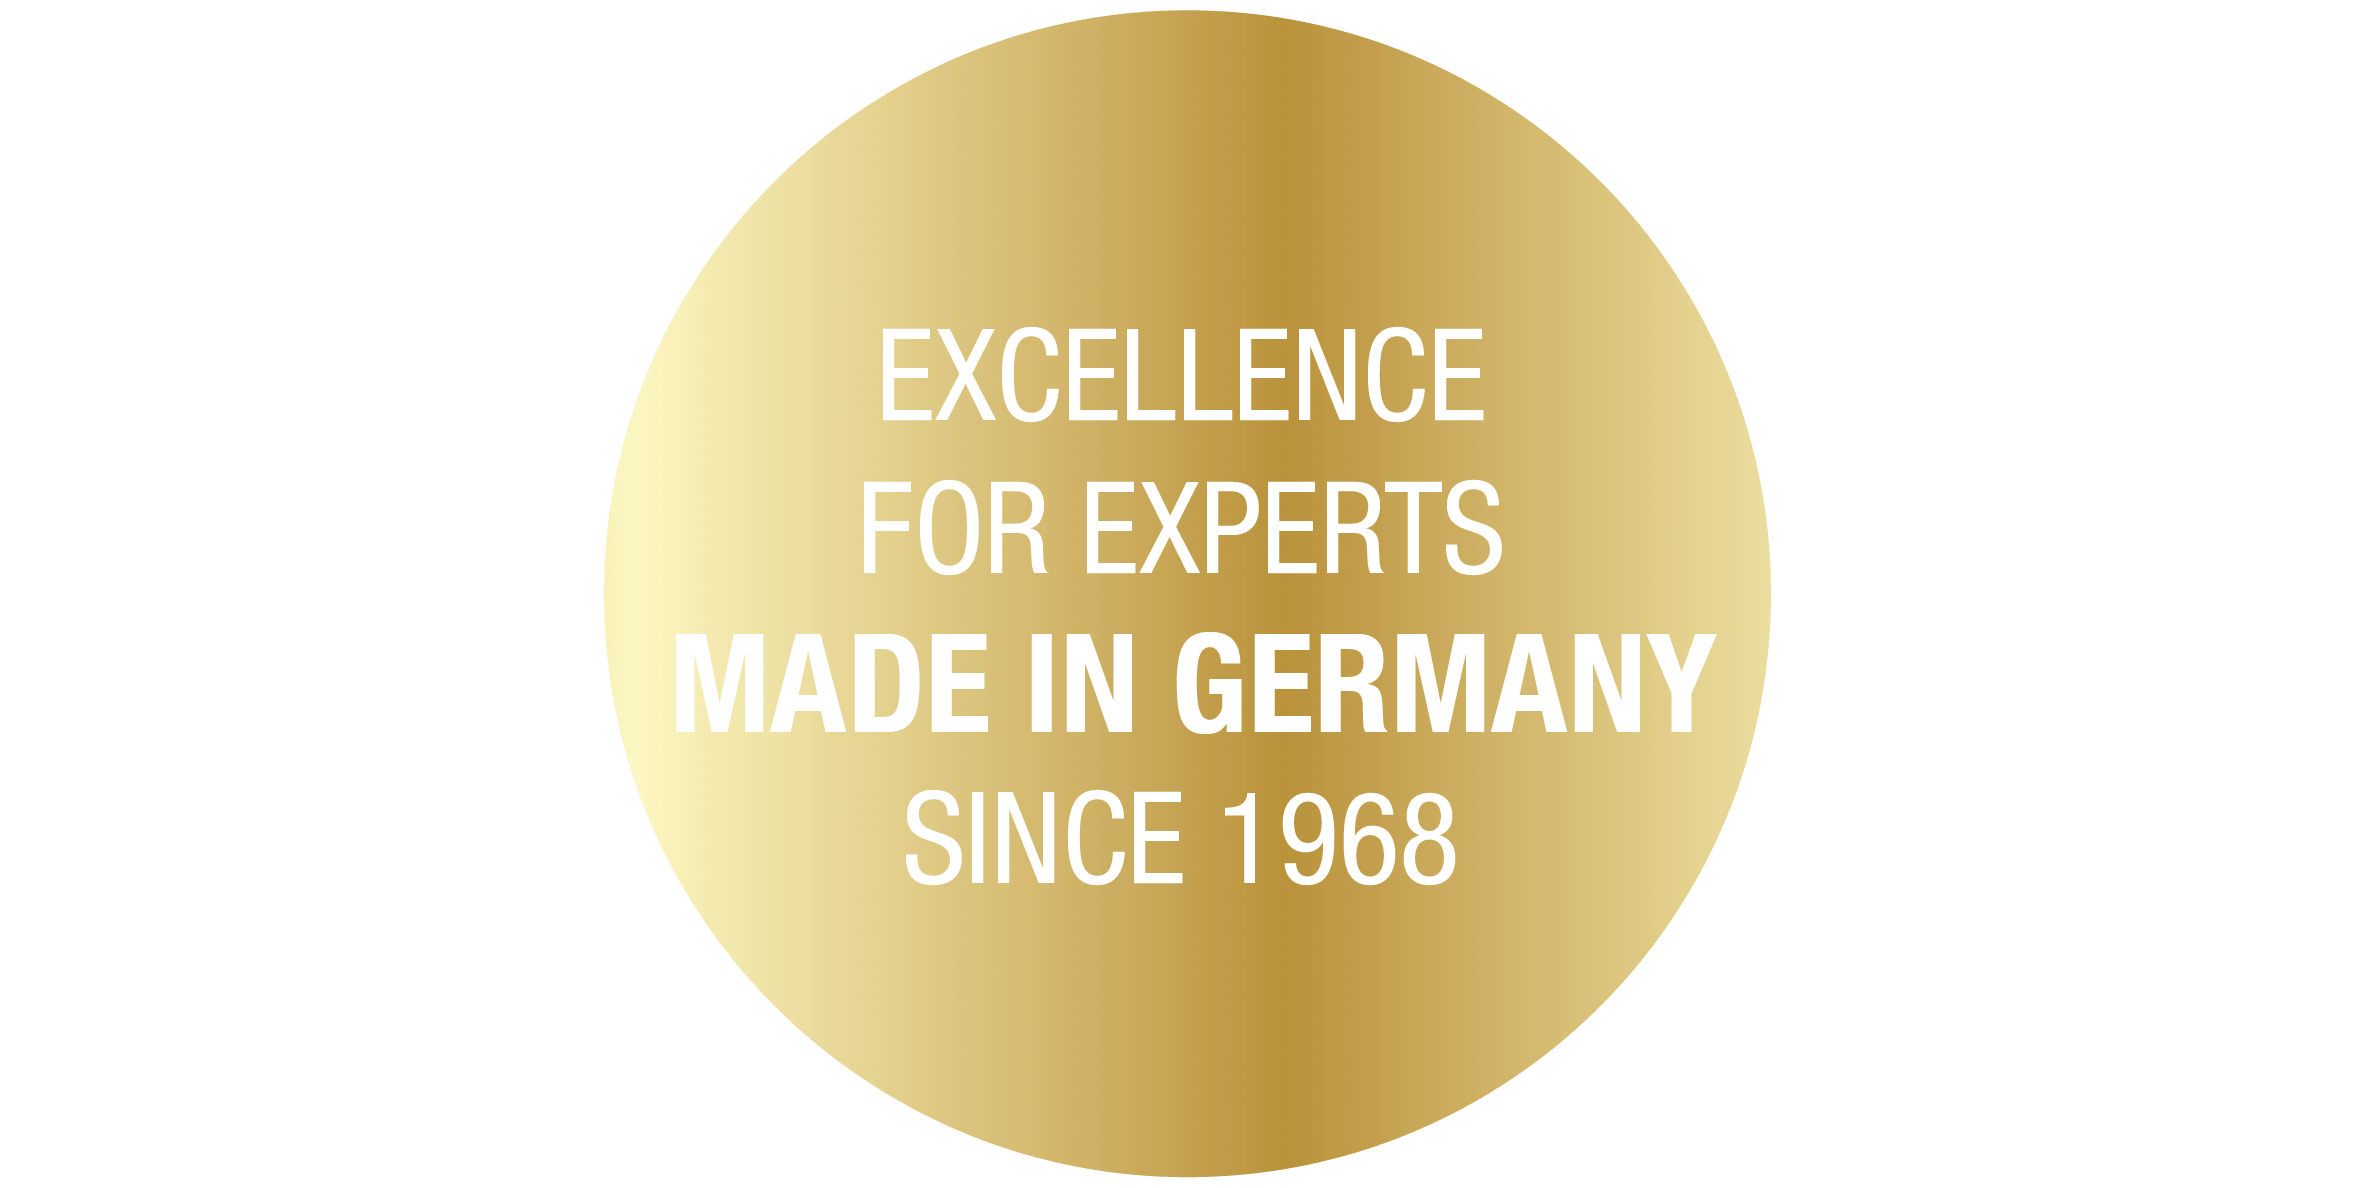 Excellence For Experts. Made in Germany